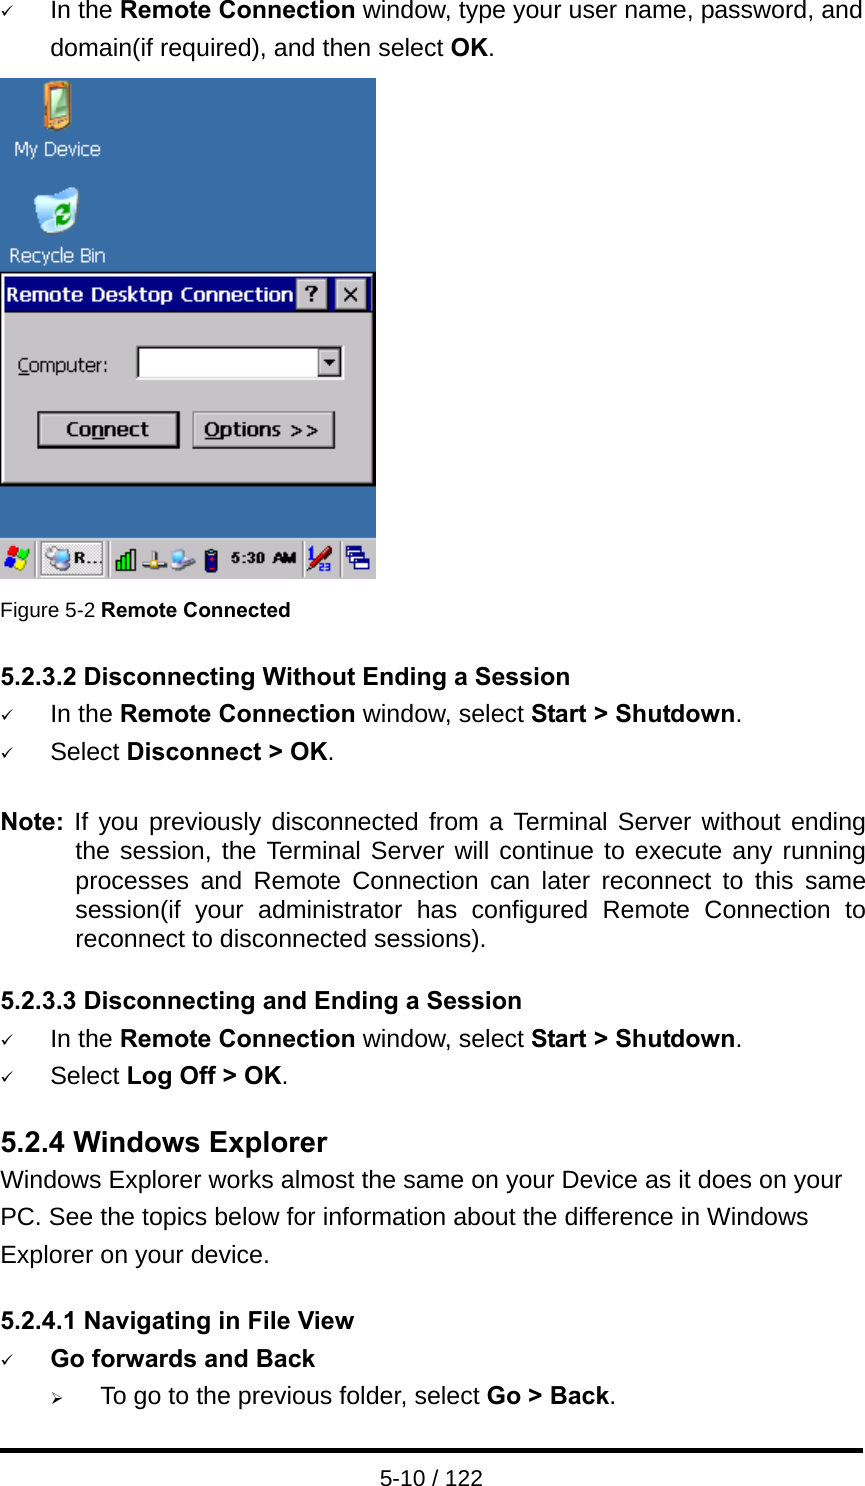  5-10 / 122 9 In the Remote Connection window, type your user name, password, and domain(if required), and then select OK.  Figure 5-2 Remote Connected  5.2.3.2 Disconnecting Without Ending a Session 9 In the Remote Connection window, select Start &gt; Shutdown. 9 Select Disconnect &gt; OK.  Note:  If you previously disconnected from a Terminal Server without ending the session, the Terminal Server will continue to execute any running processes and Remote Connection can later reconnect to this same session(if your administrator has configured Remote Connection to reconnect to disconnected sessions).  5.2.3.3 Disconnecting and Ending a Session 9 In the Remote Connection window, select Start &gt; Shutdown. 9 Select Log Off &gt; OK.  5.2.4 Windows Explorer Windows Explorer works almost the same on your Device as it does on your PC. See the topics below for information about the difference in Windows Explorer on your device.  5.2.4.1 Navigating in File View 9 Go forwards and Back ¾ To go to the previous folder, select Go &gt; Back. 